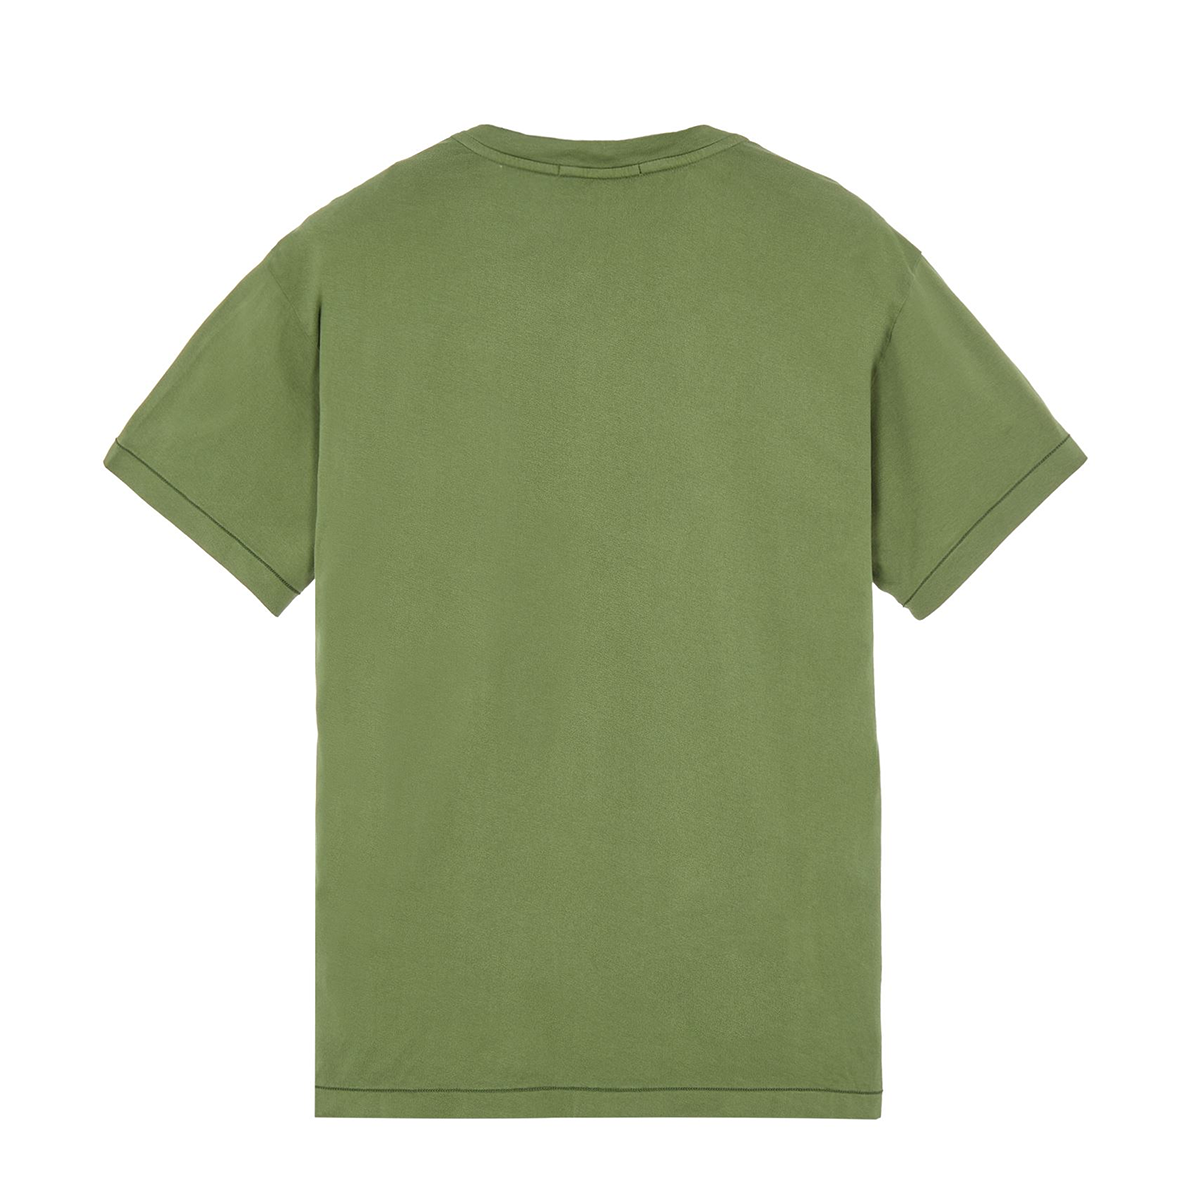 STONE ISLAND LOGO PATCH T-SHIRT IN OLIVE GREEN